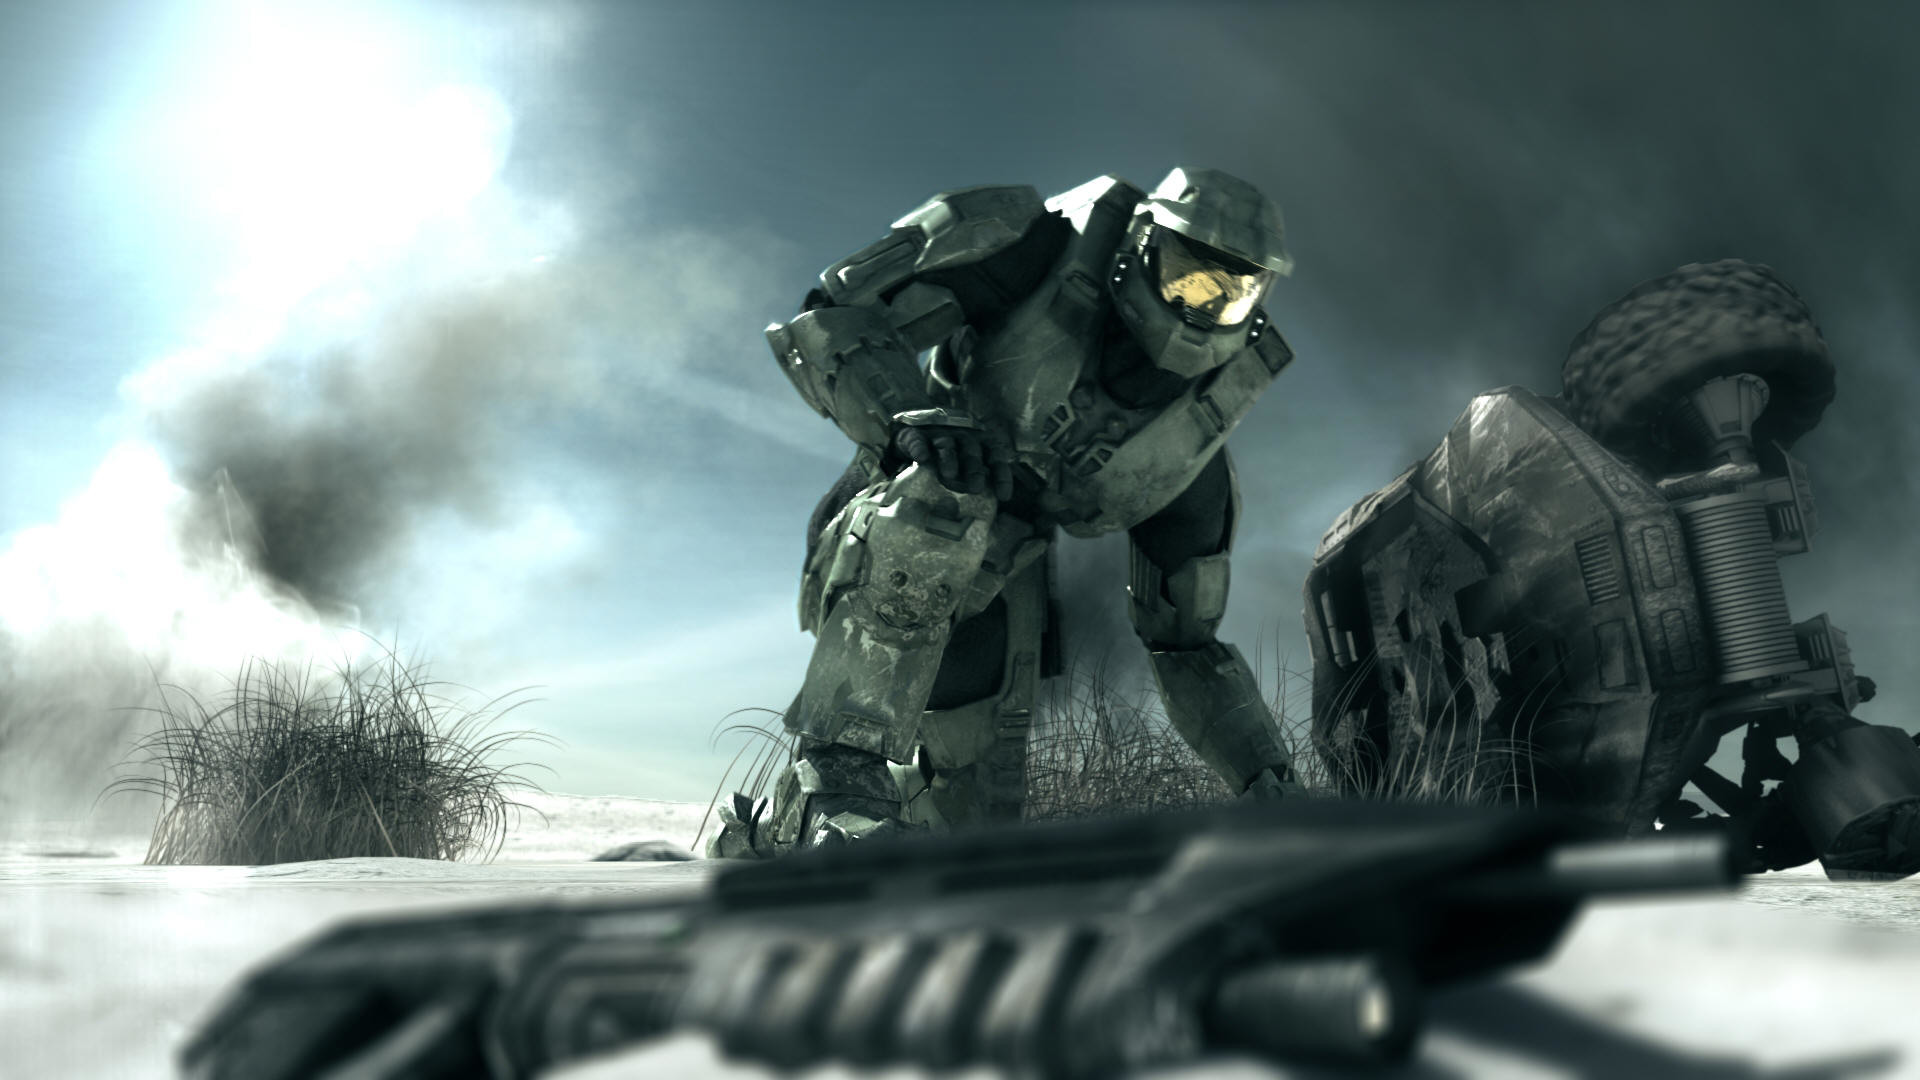 1920x1080 Halo 5 Master Chief Wallpapers Photo